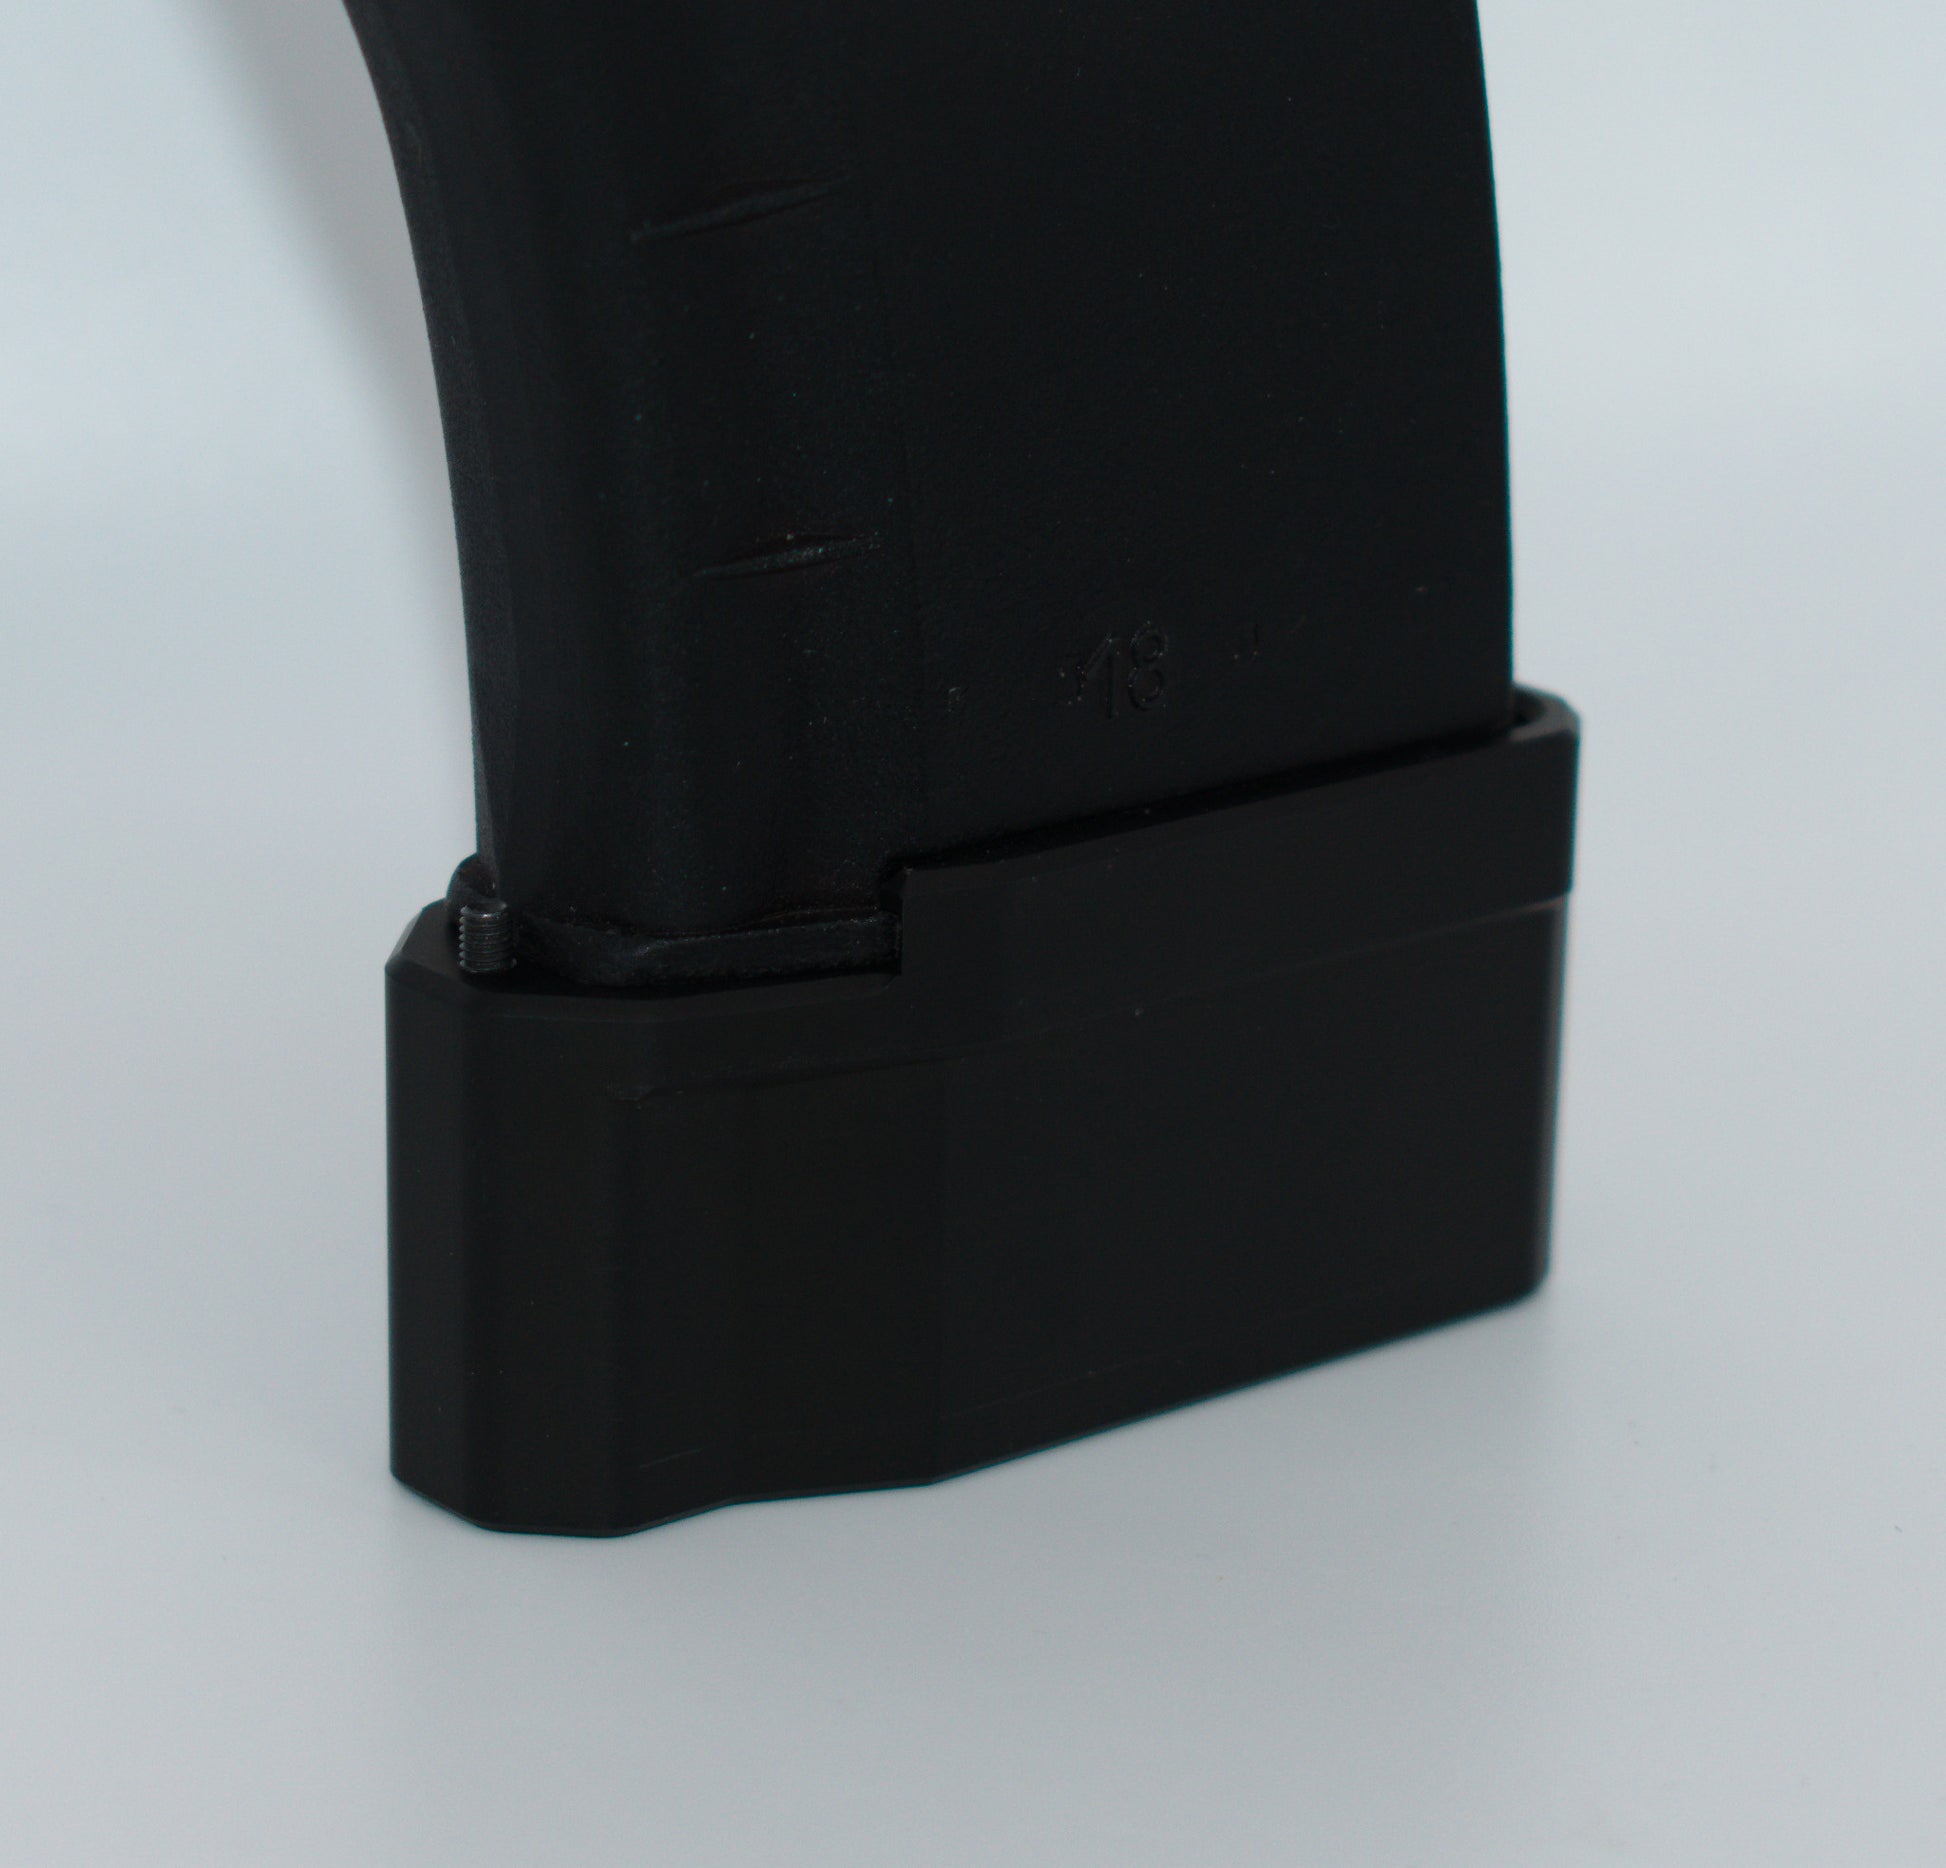 Side View with Magazine: AMRU Designs AK-47 plus 5 magazine extensions for 7.62x39 magazines.